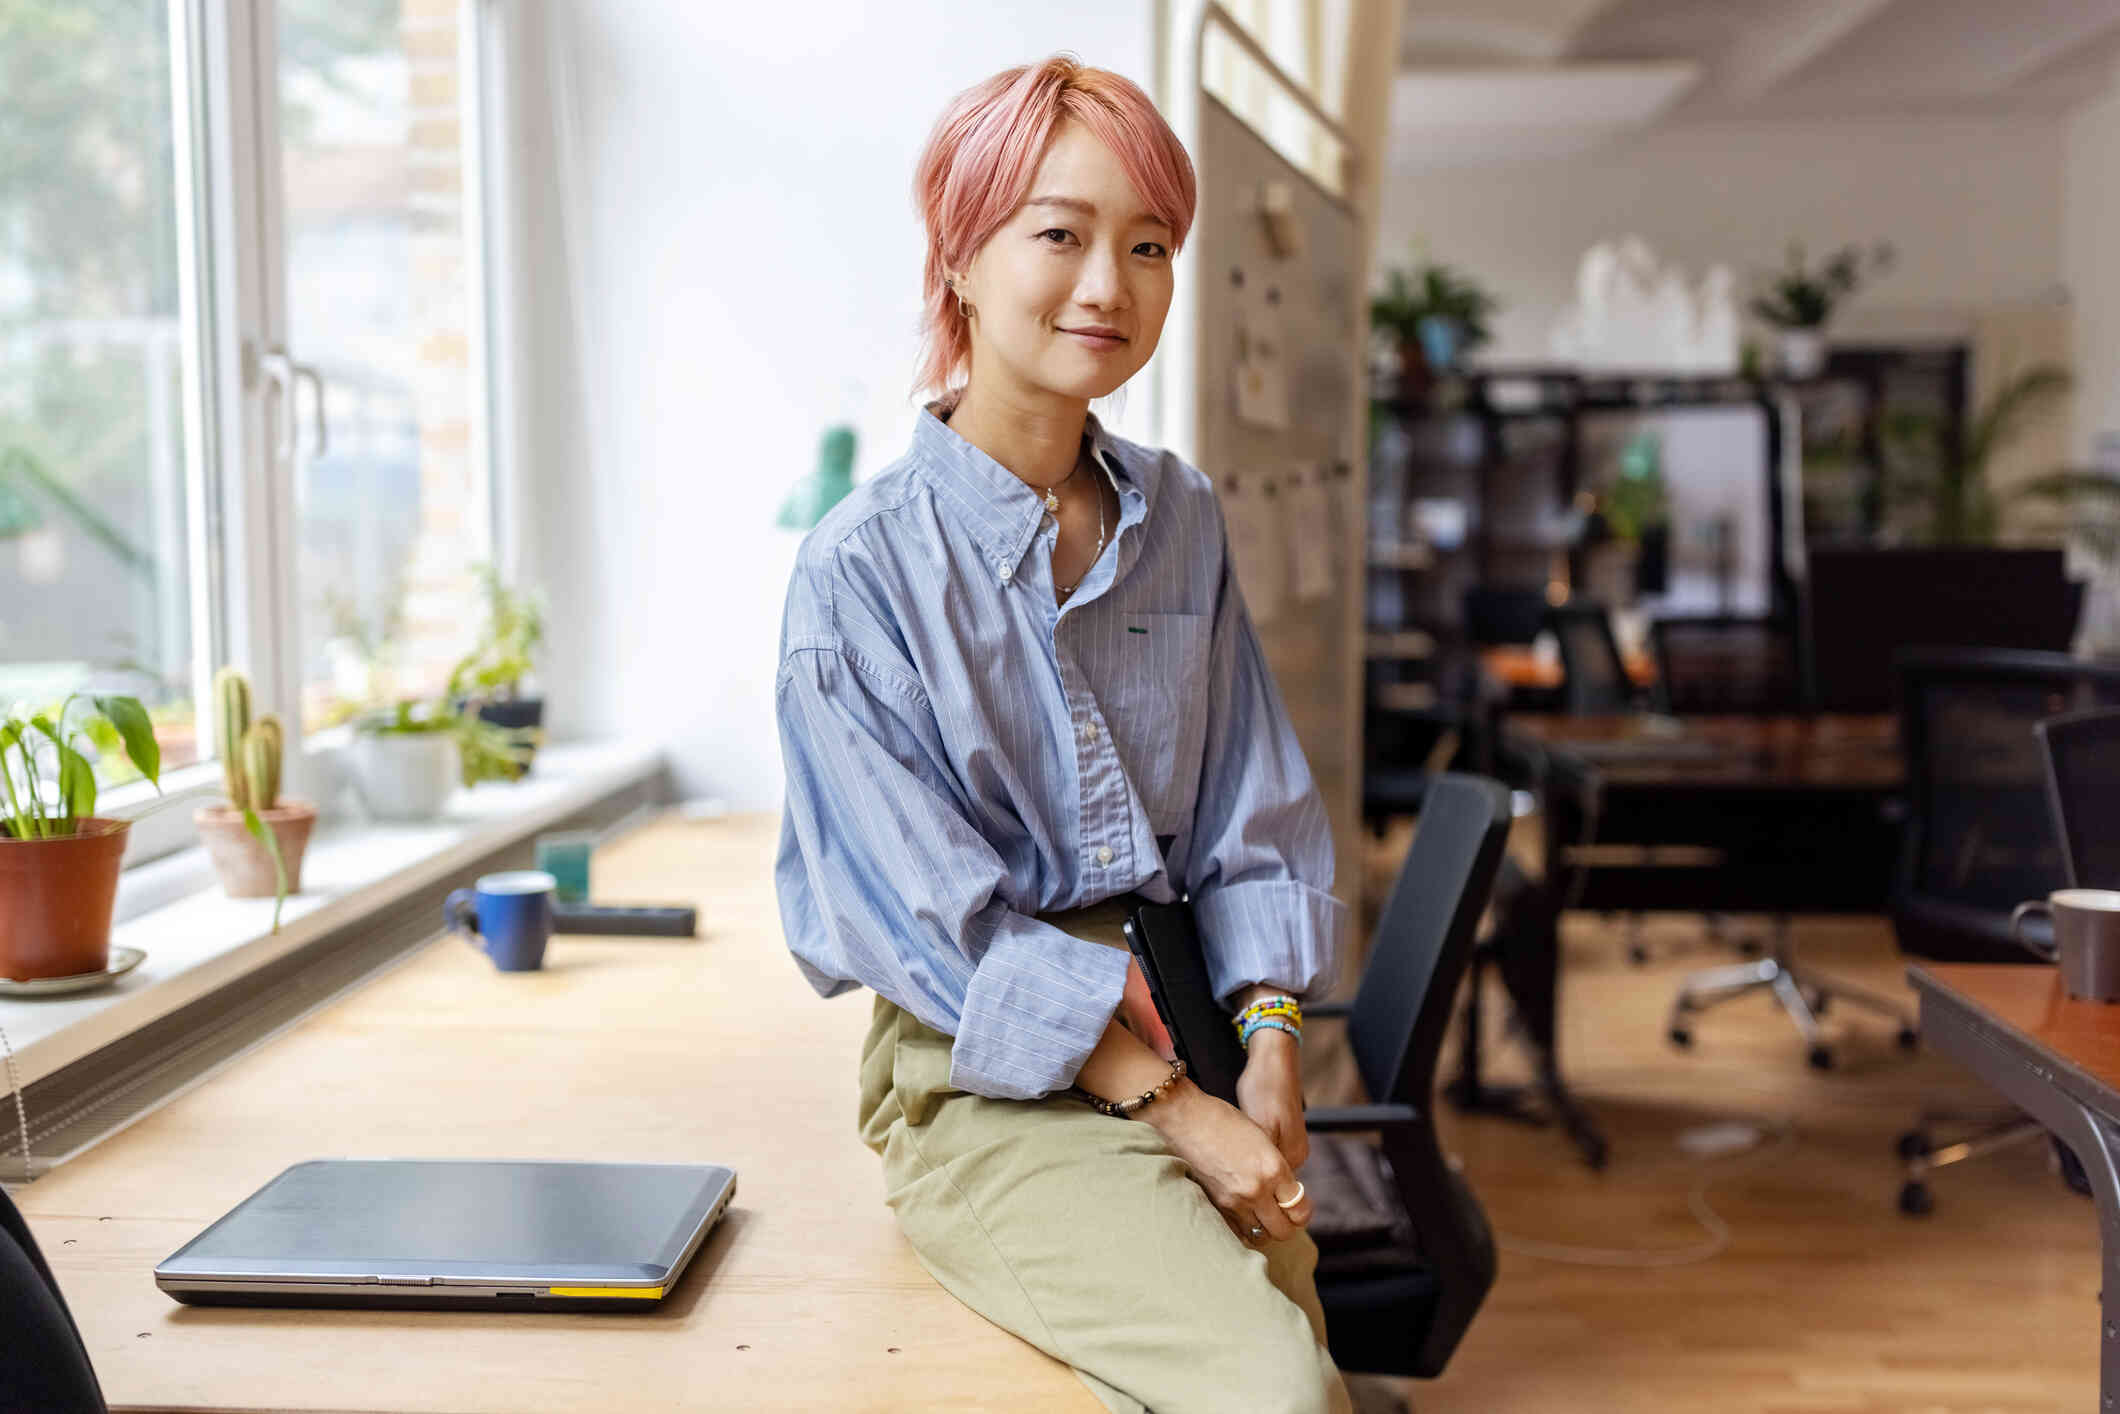 A woman with short pink hair leans against the counter in an office space and smiles softly at the camera while holding a closed laptop.